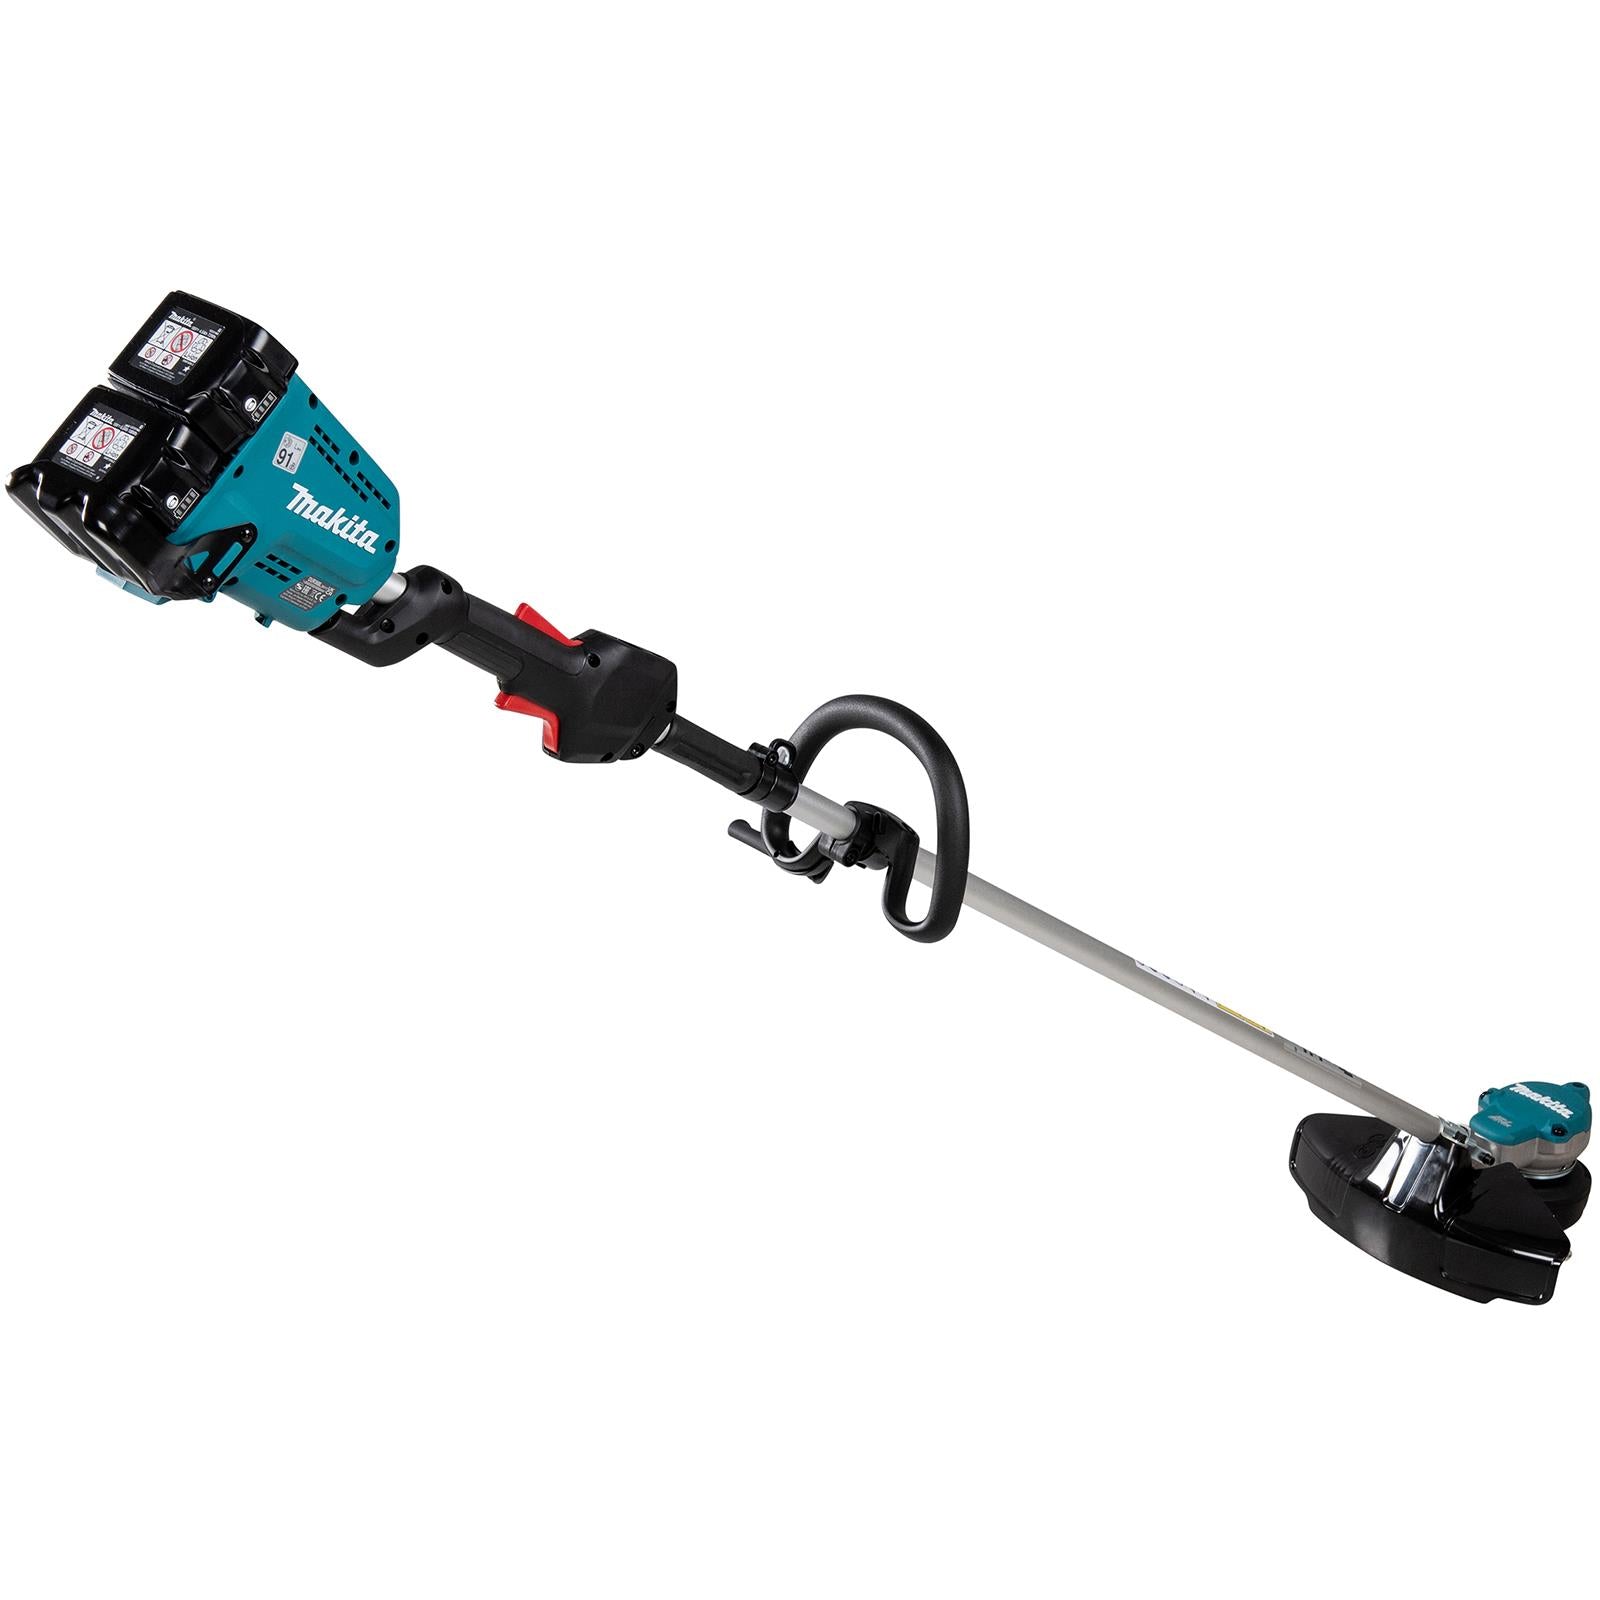 Makita Line Trimmer Strimmer Kit 2 x 18V LXT Brushless Cordless Garden Lawn Strimming 2 x 5Ah Battery and Dual Rapid Charger DUR368LPT2